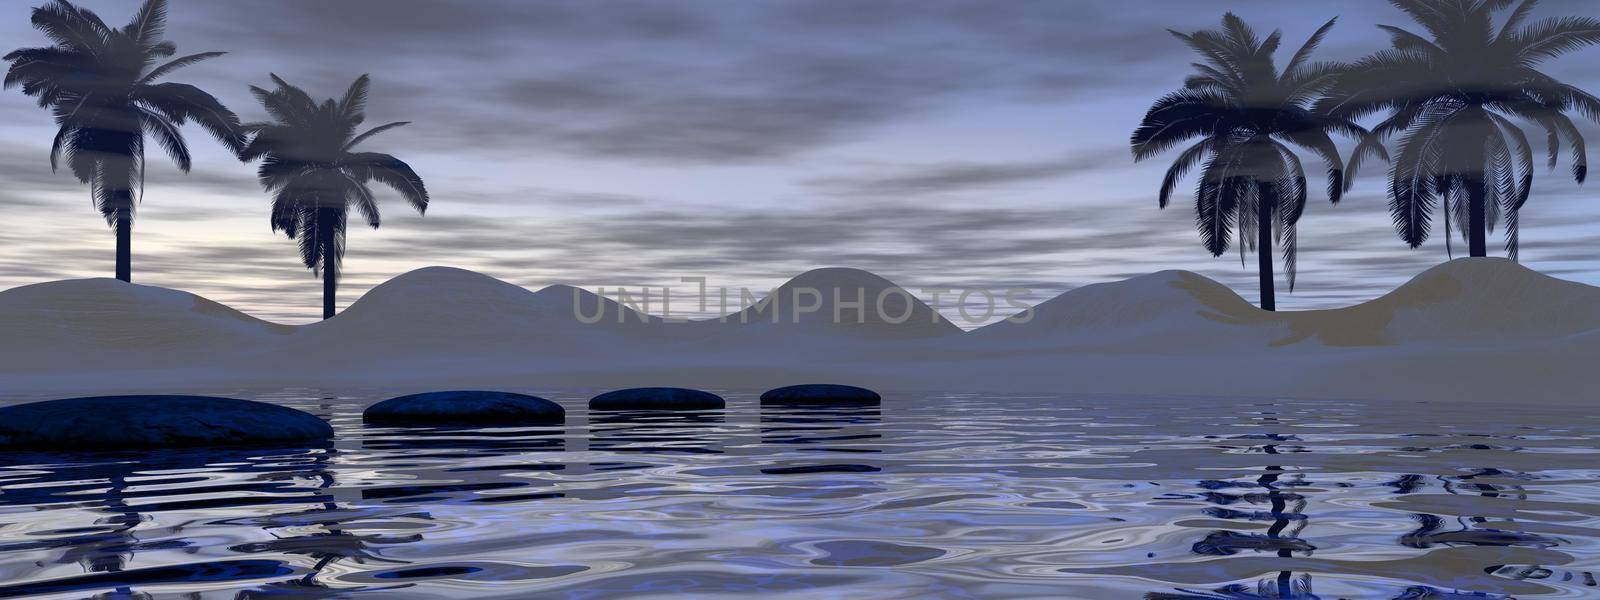 very beautiful landscape of meditation and serenity - 3d rendering by mariephotos